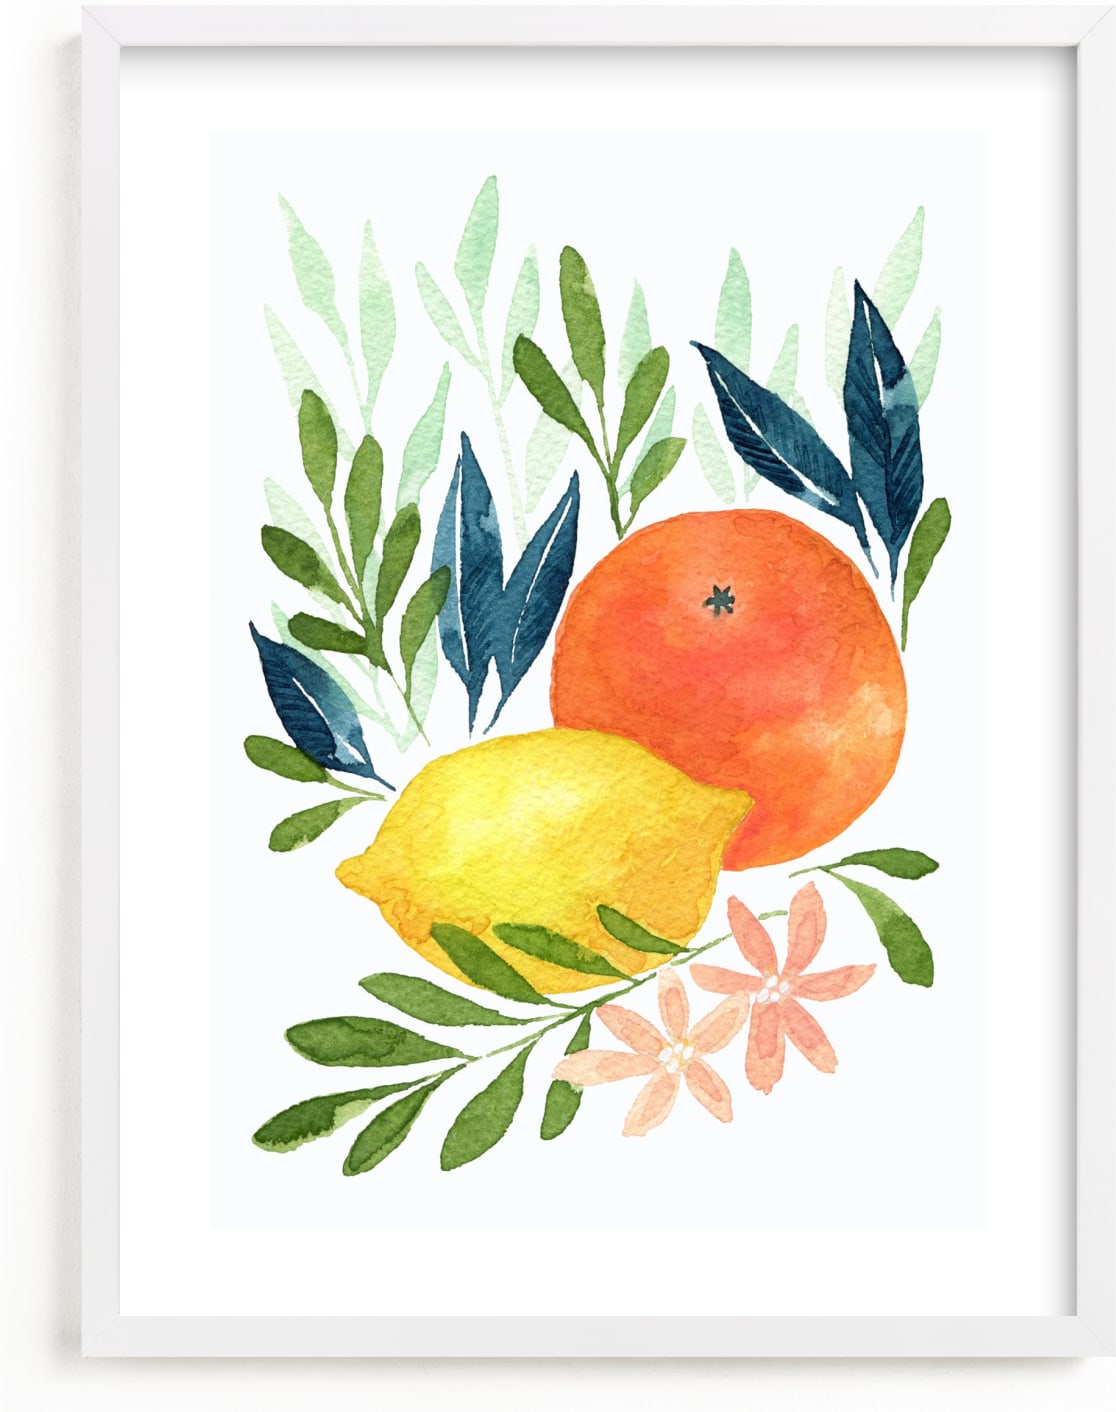 This is a colorful kids wall art by Kara Aina called Citrus Garden.